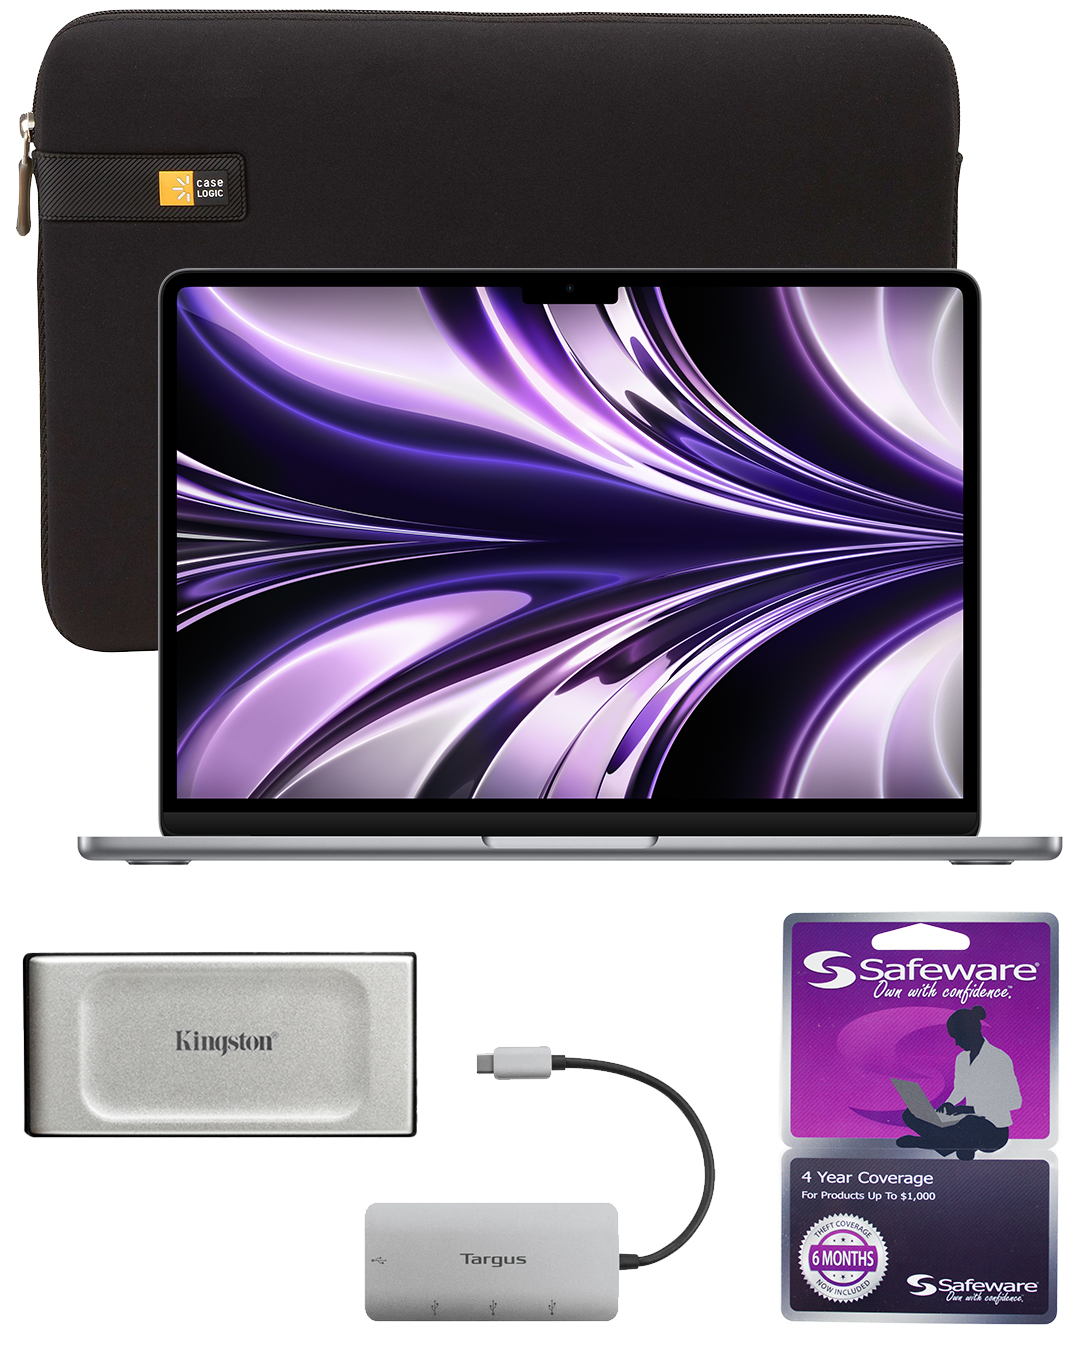 13-inch MacBook Air with Safeware 4 year warranty, 13-inch protective sleeve, 1TB external hard drive and 3-port USB 3.0 hub